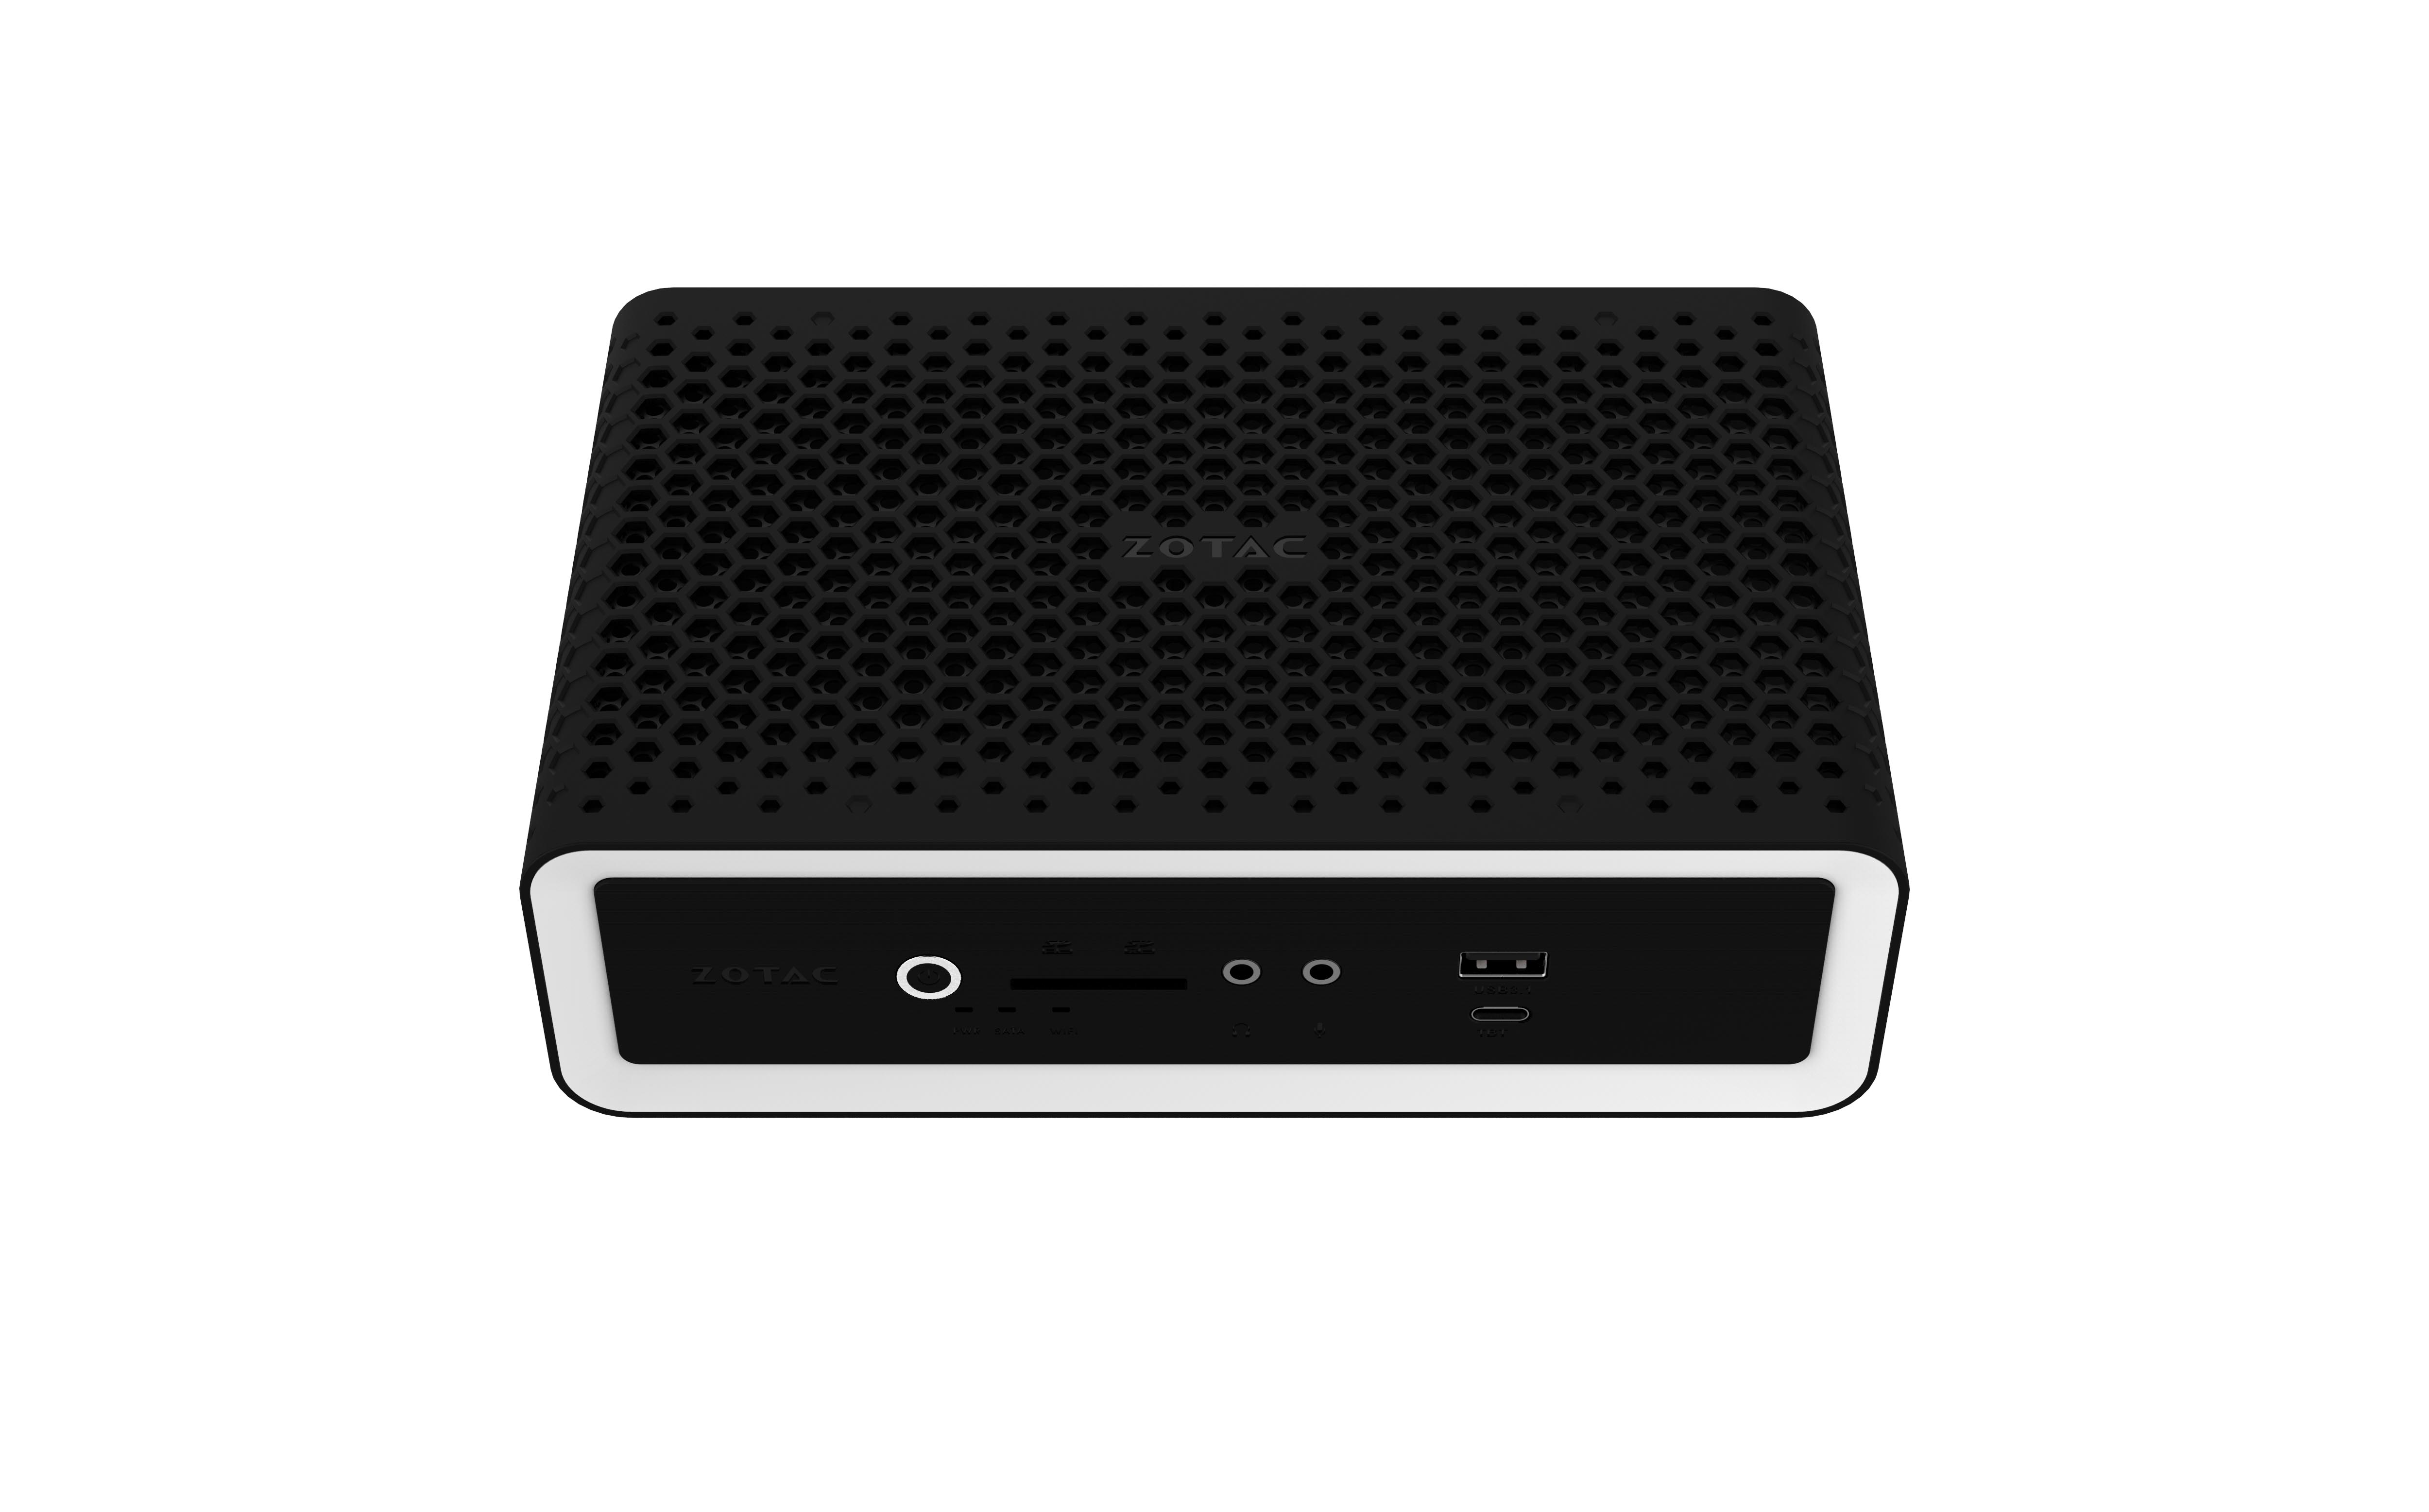 Zotac's silent mini workstation PC could be using this